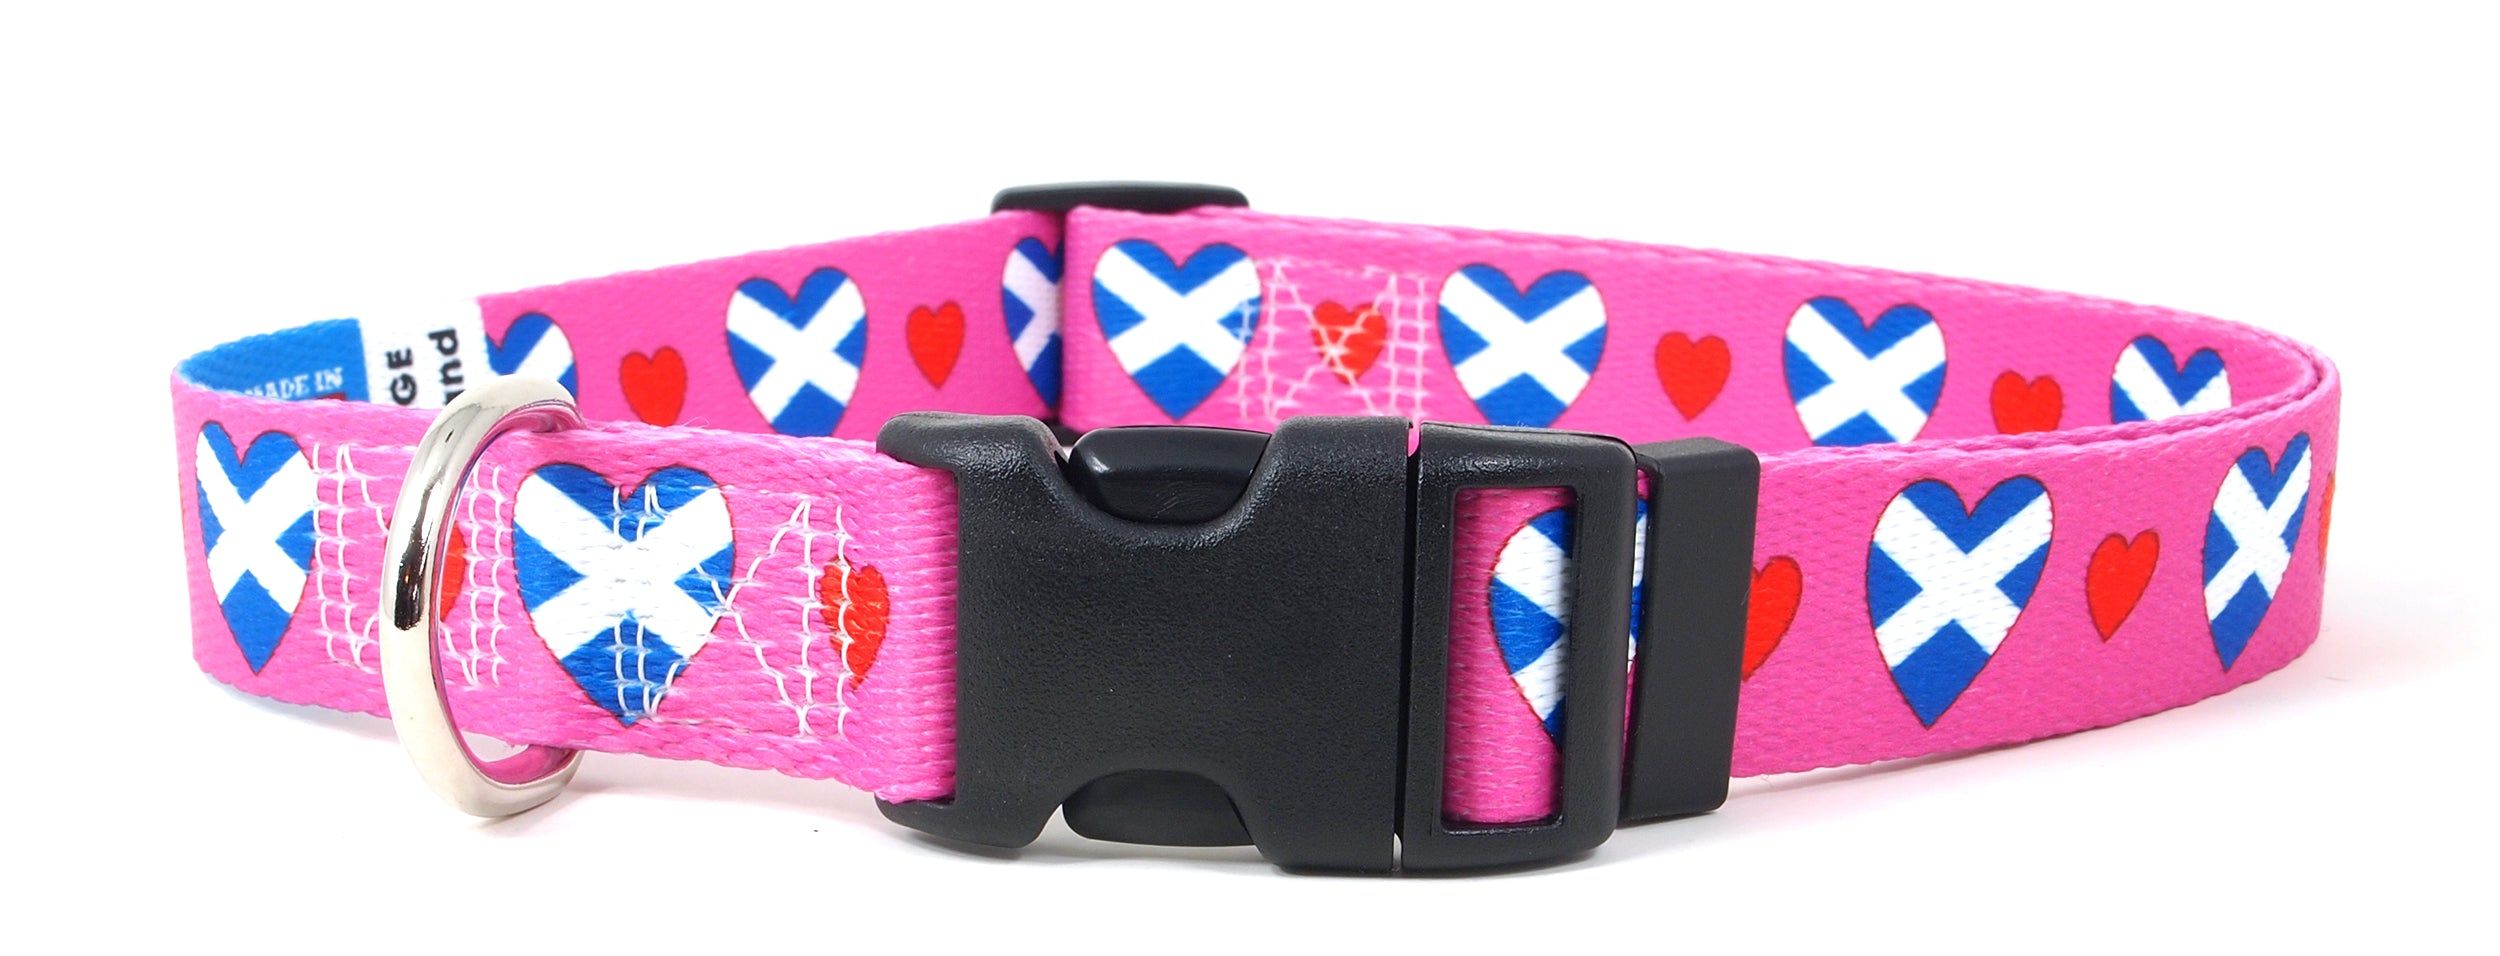 Pink Dog Collar with Scotland Hearts Pattern